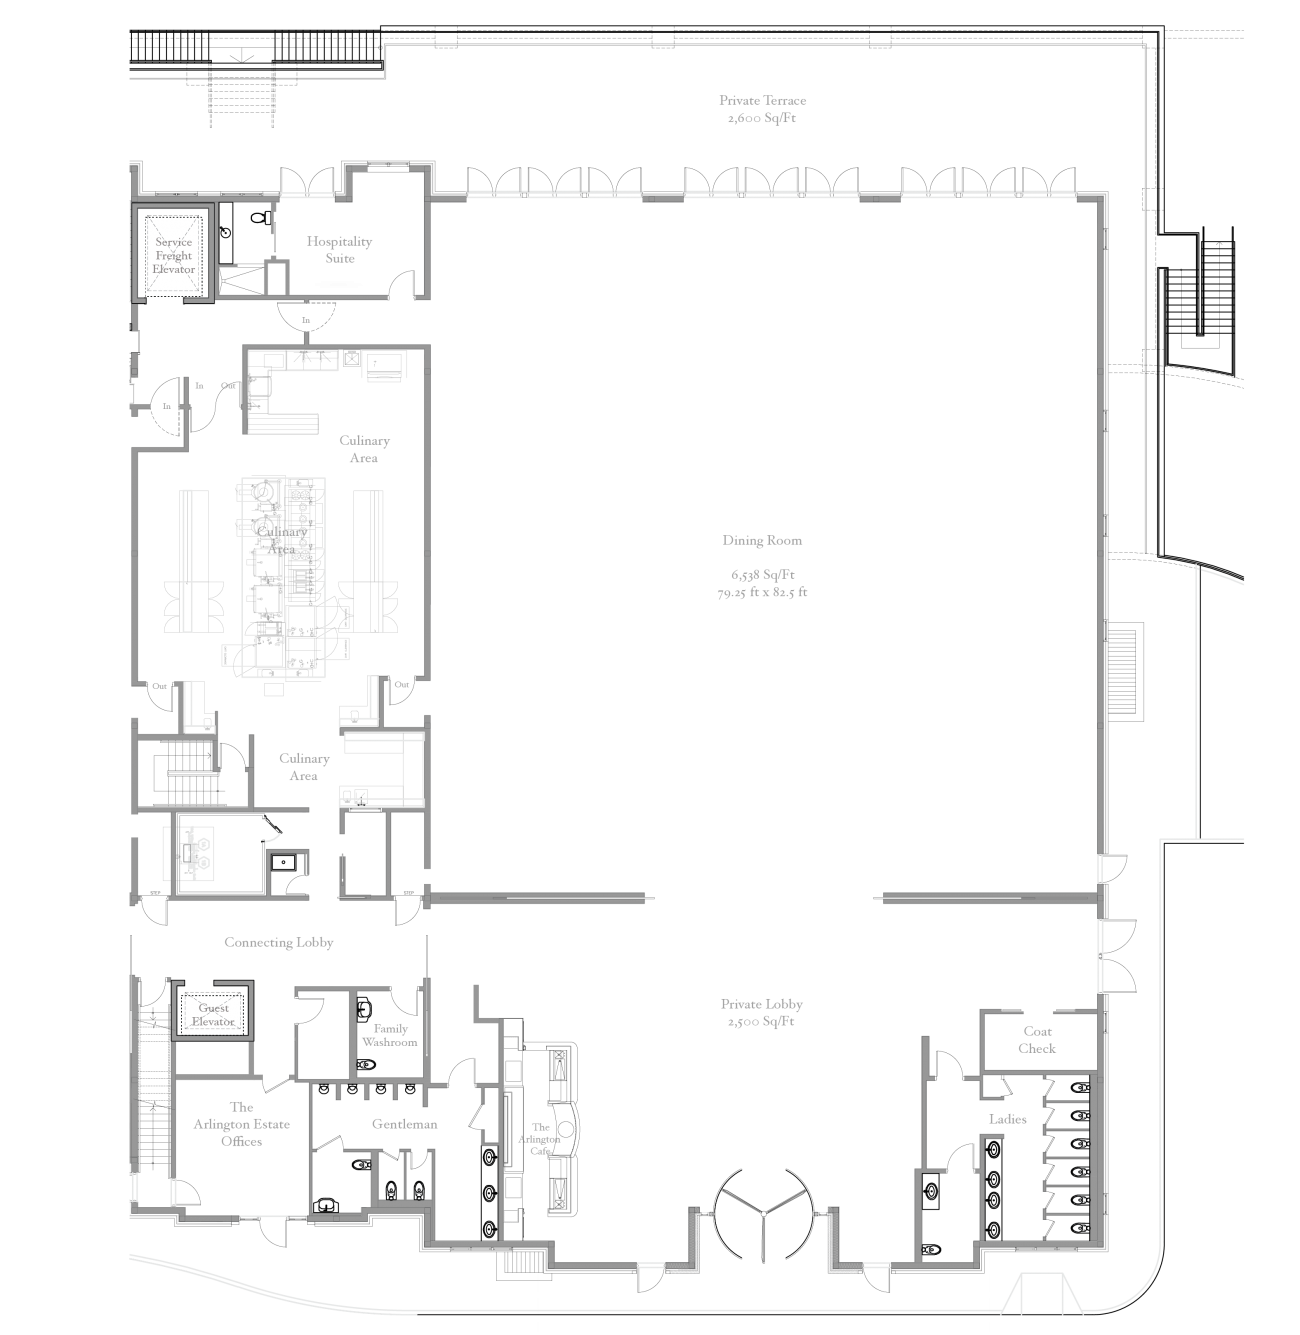 Floorplan for West Wing